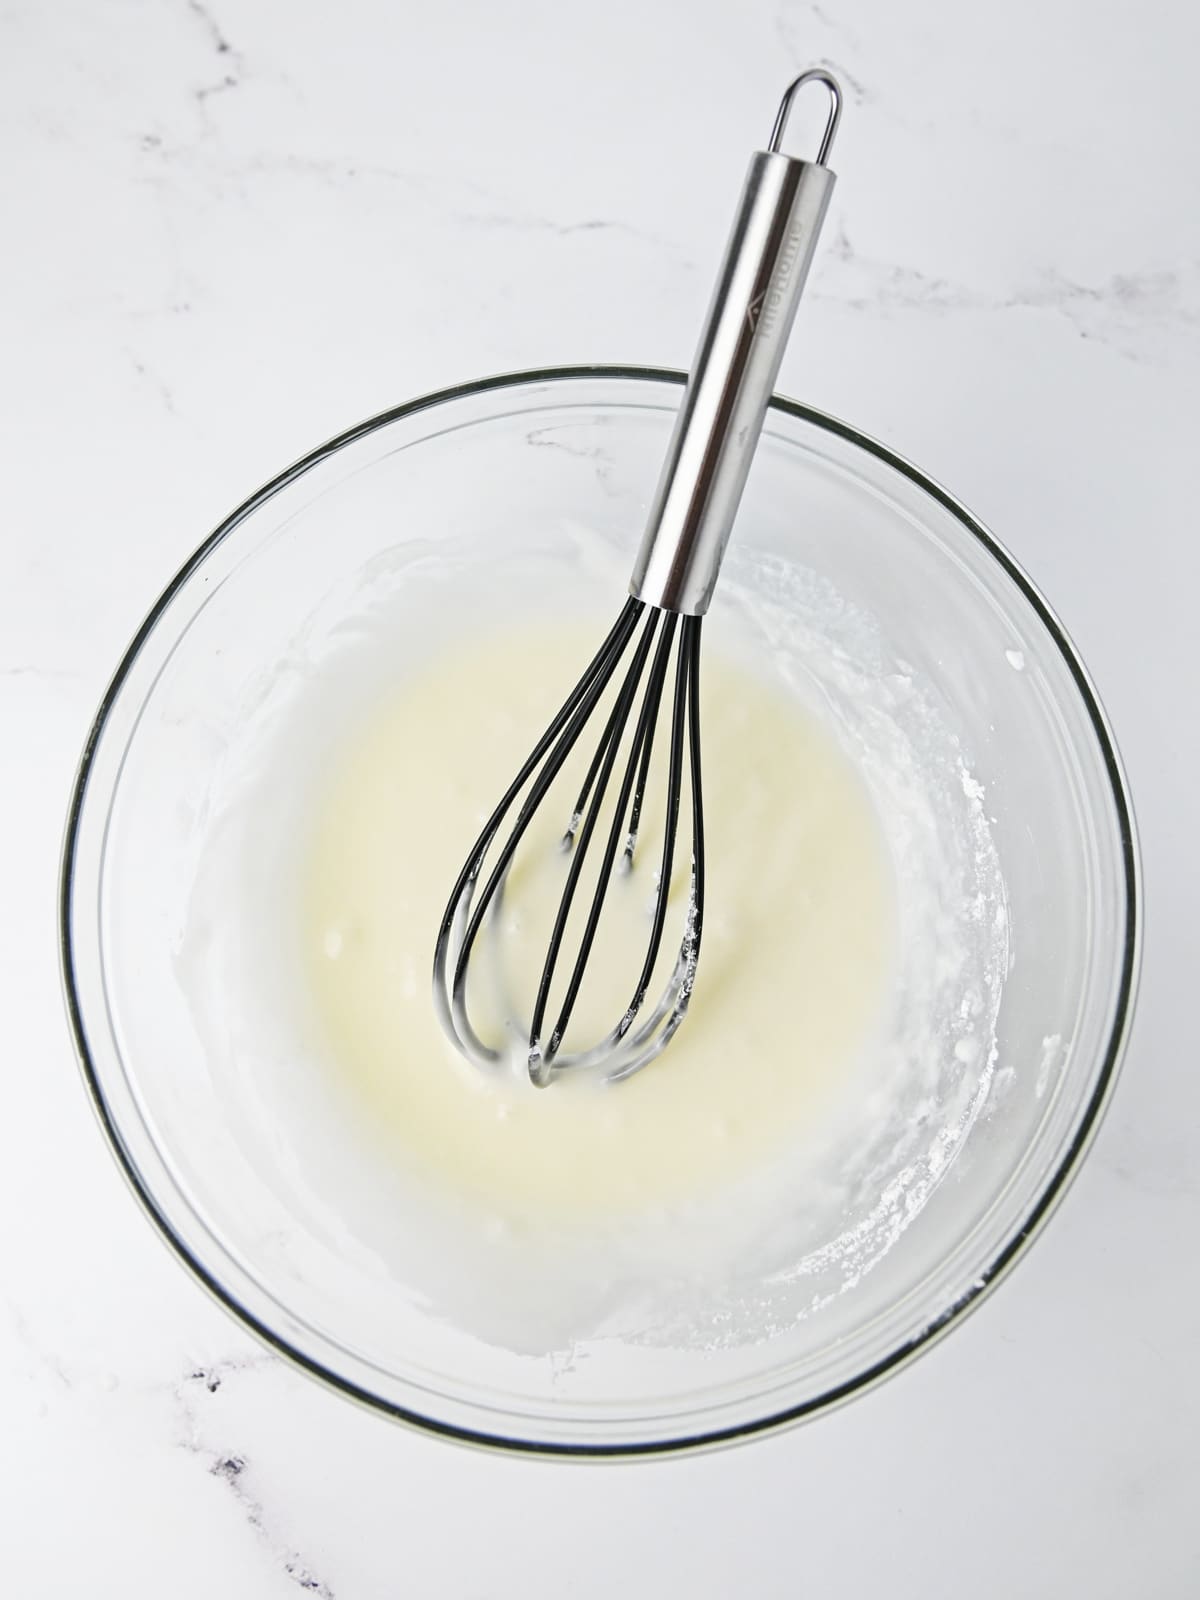 whisk icing ingredients together in bowl